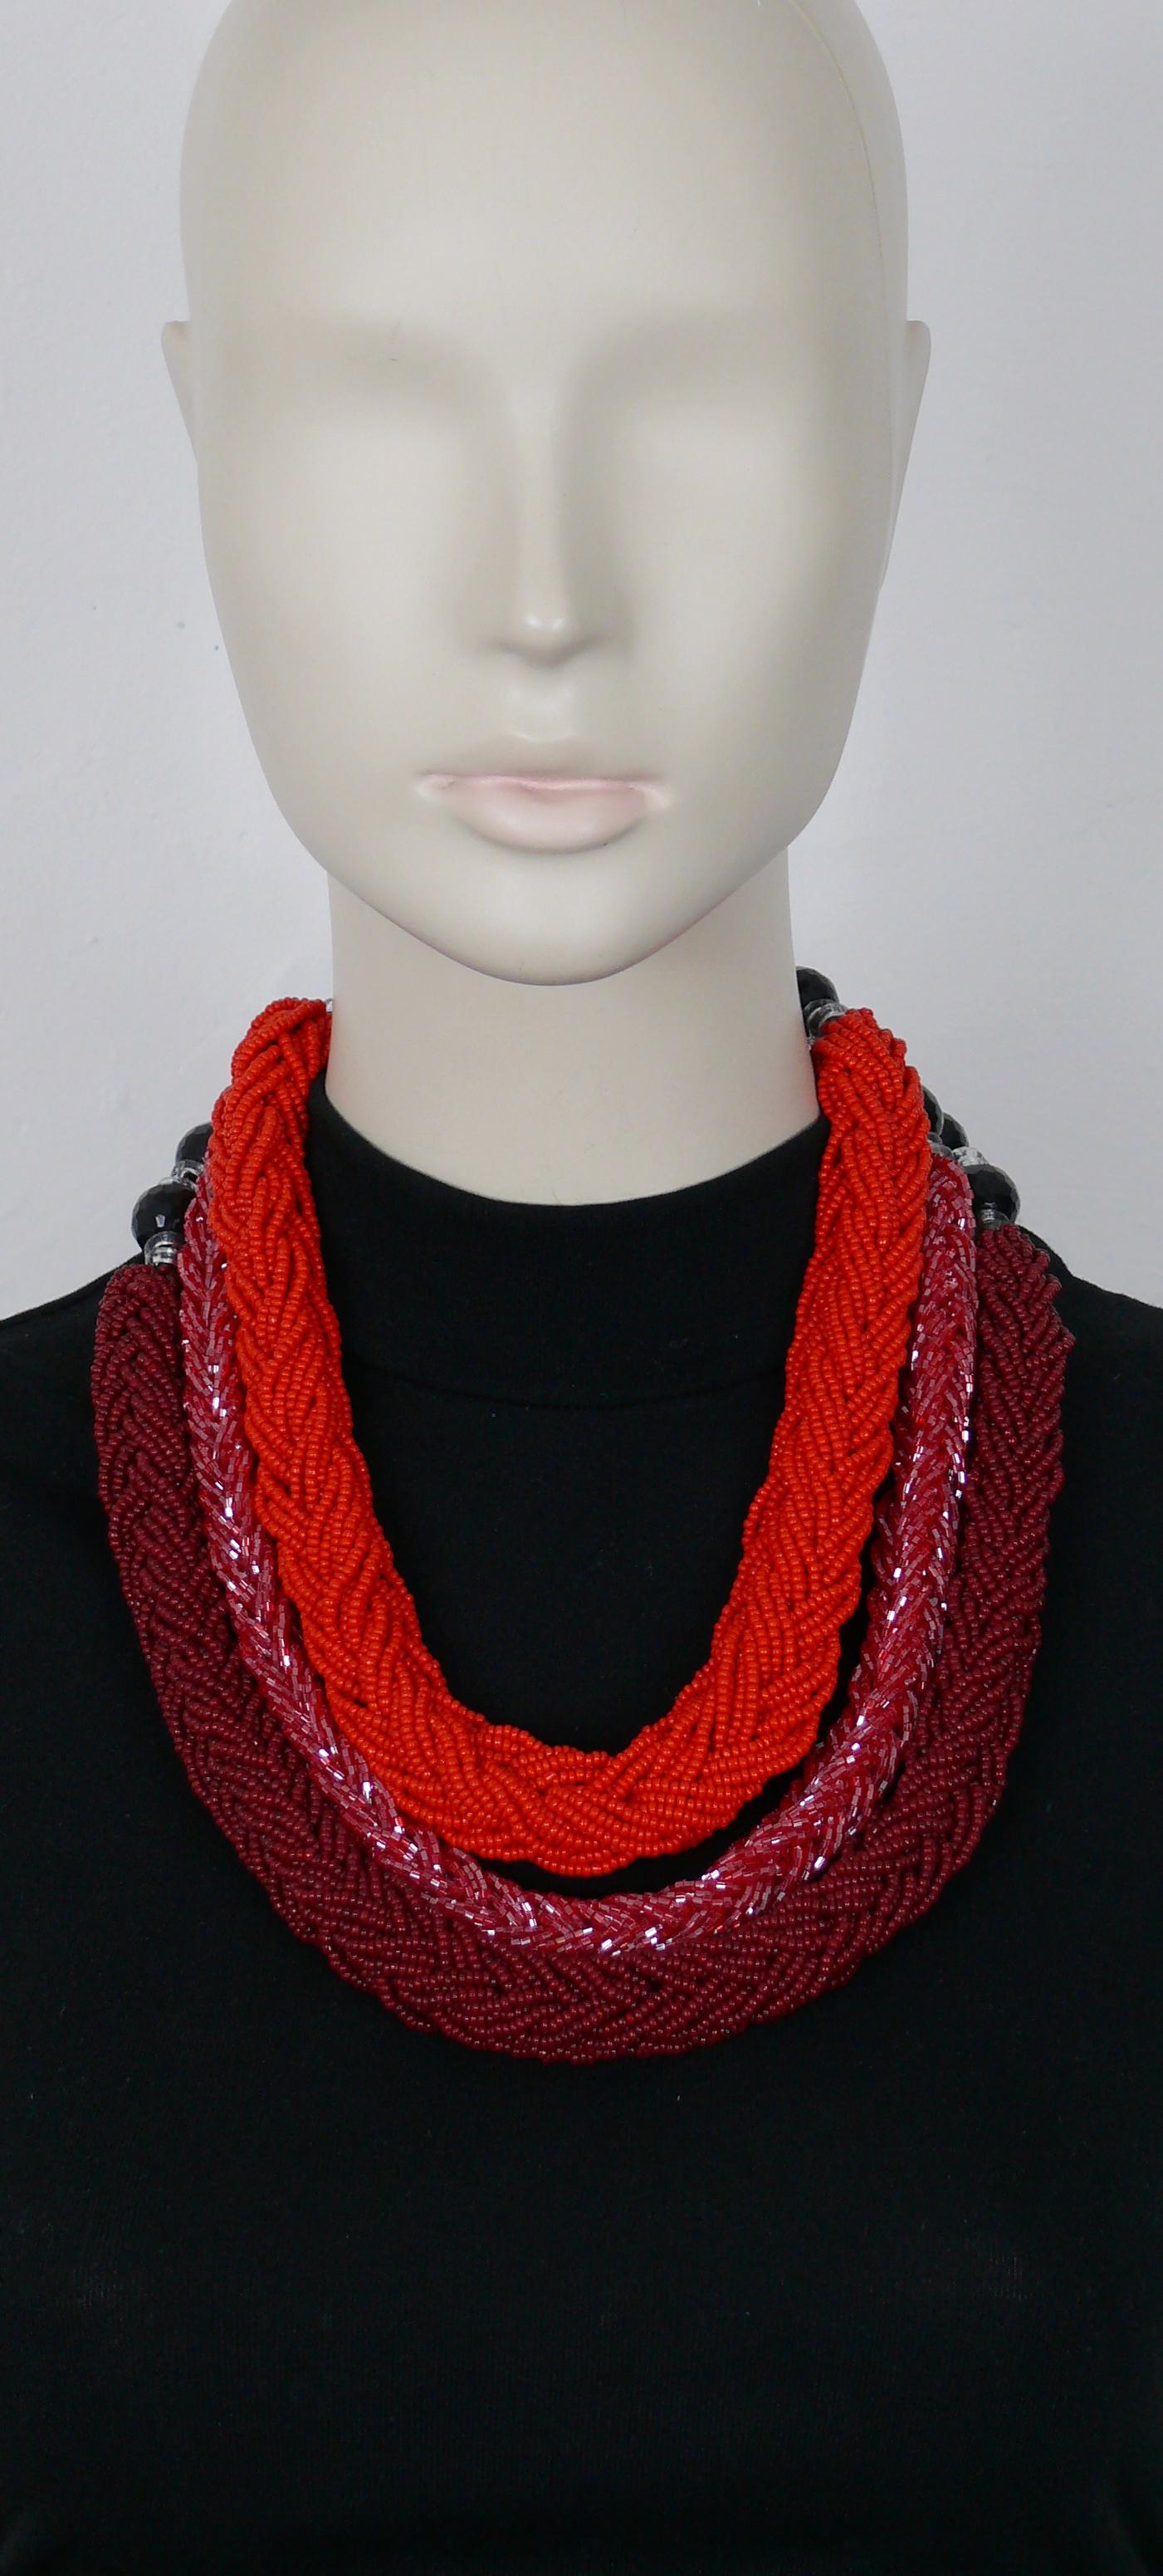 GIORGIO ARMANI statement necklace meade of three strands of braided baids in shades of red, black resin facetted beads and clear resin rondelles.

T-bar and toggle closure.

Embossed with the GA monogram.

Indicative measurements : length approx. 56